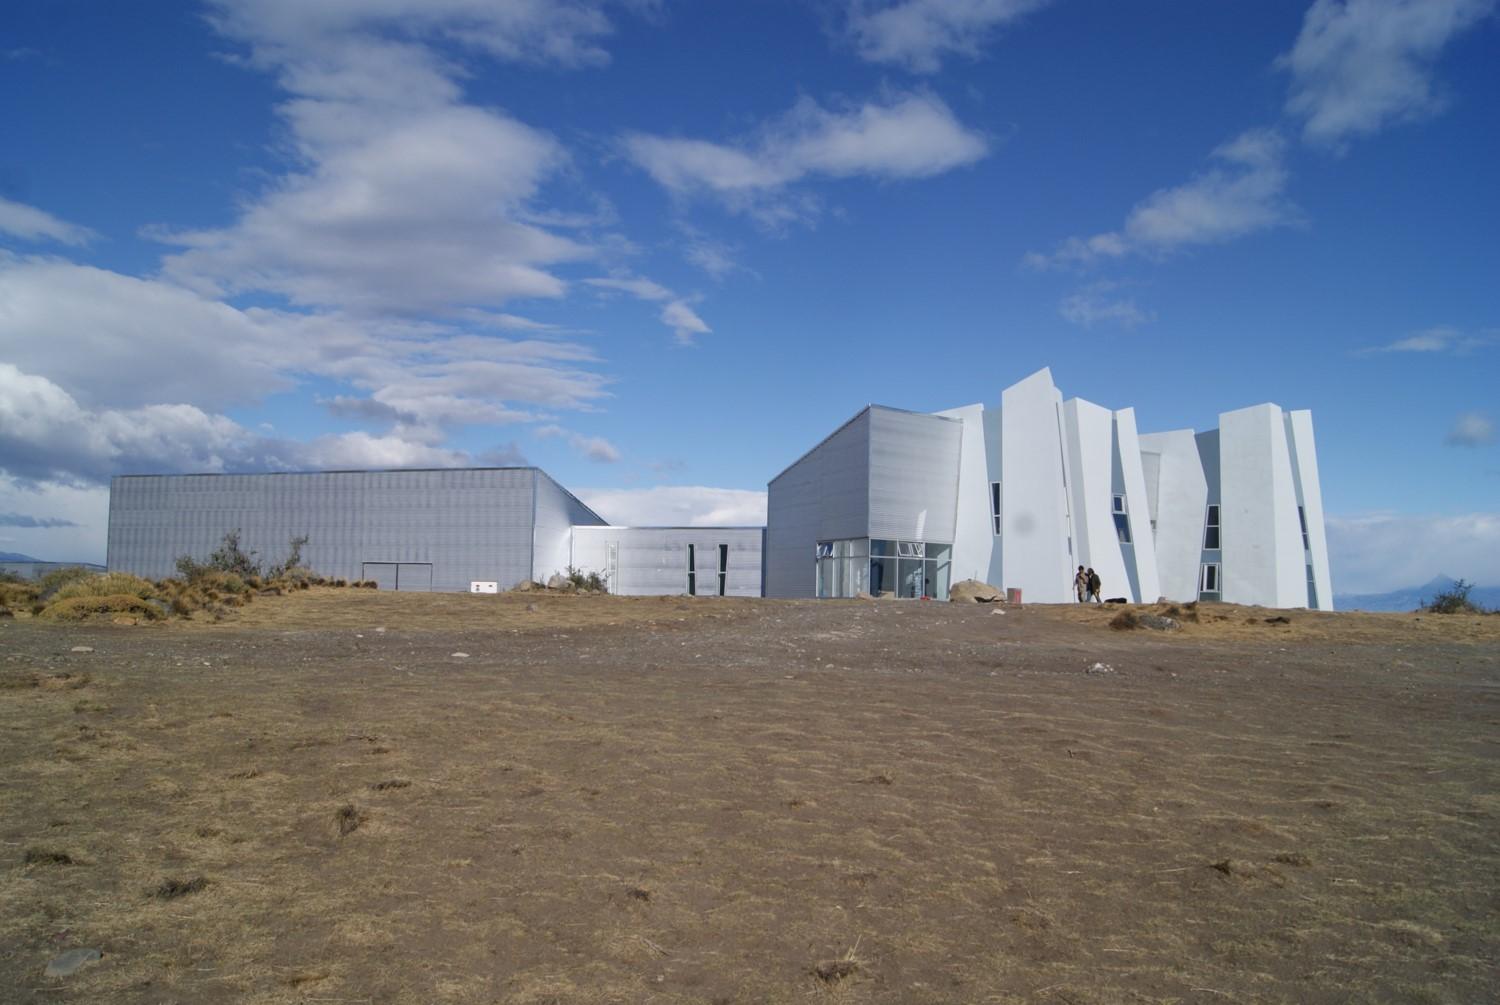 Glaciarium Ice Museum, El Calafate, Santa Cruz. The 25,000-sq. ft. interpretation center is a gateway to the Perito Moreno National Glacier Park experience. It features scientific, historic and geographic contents to help the general public understand this great natural asset of Southern Patagonia.